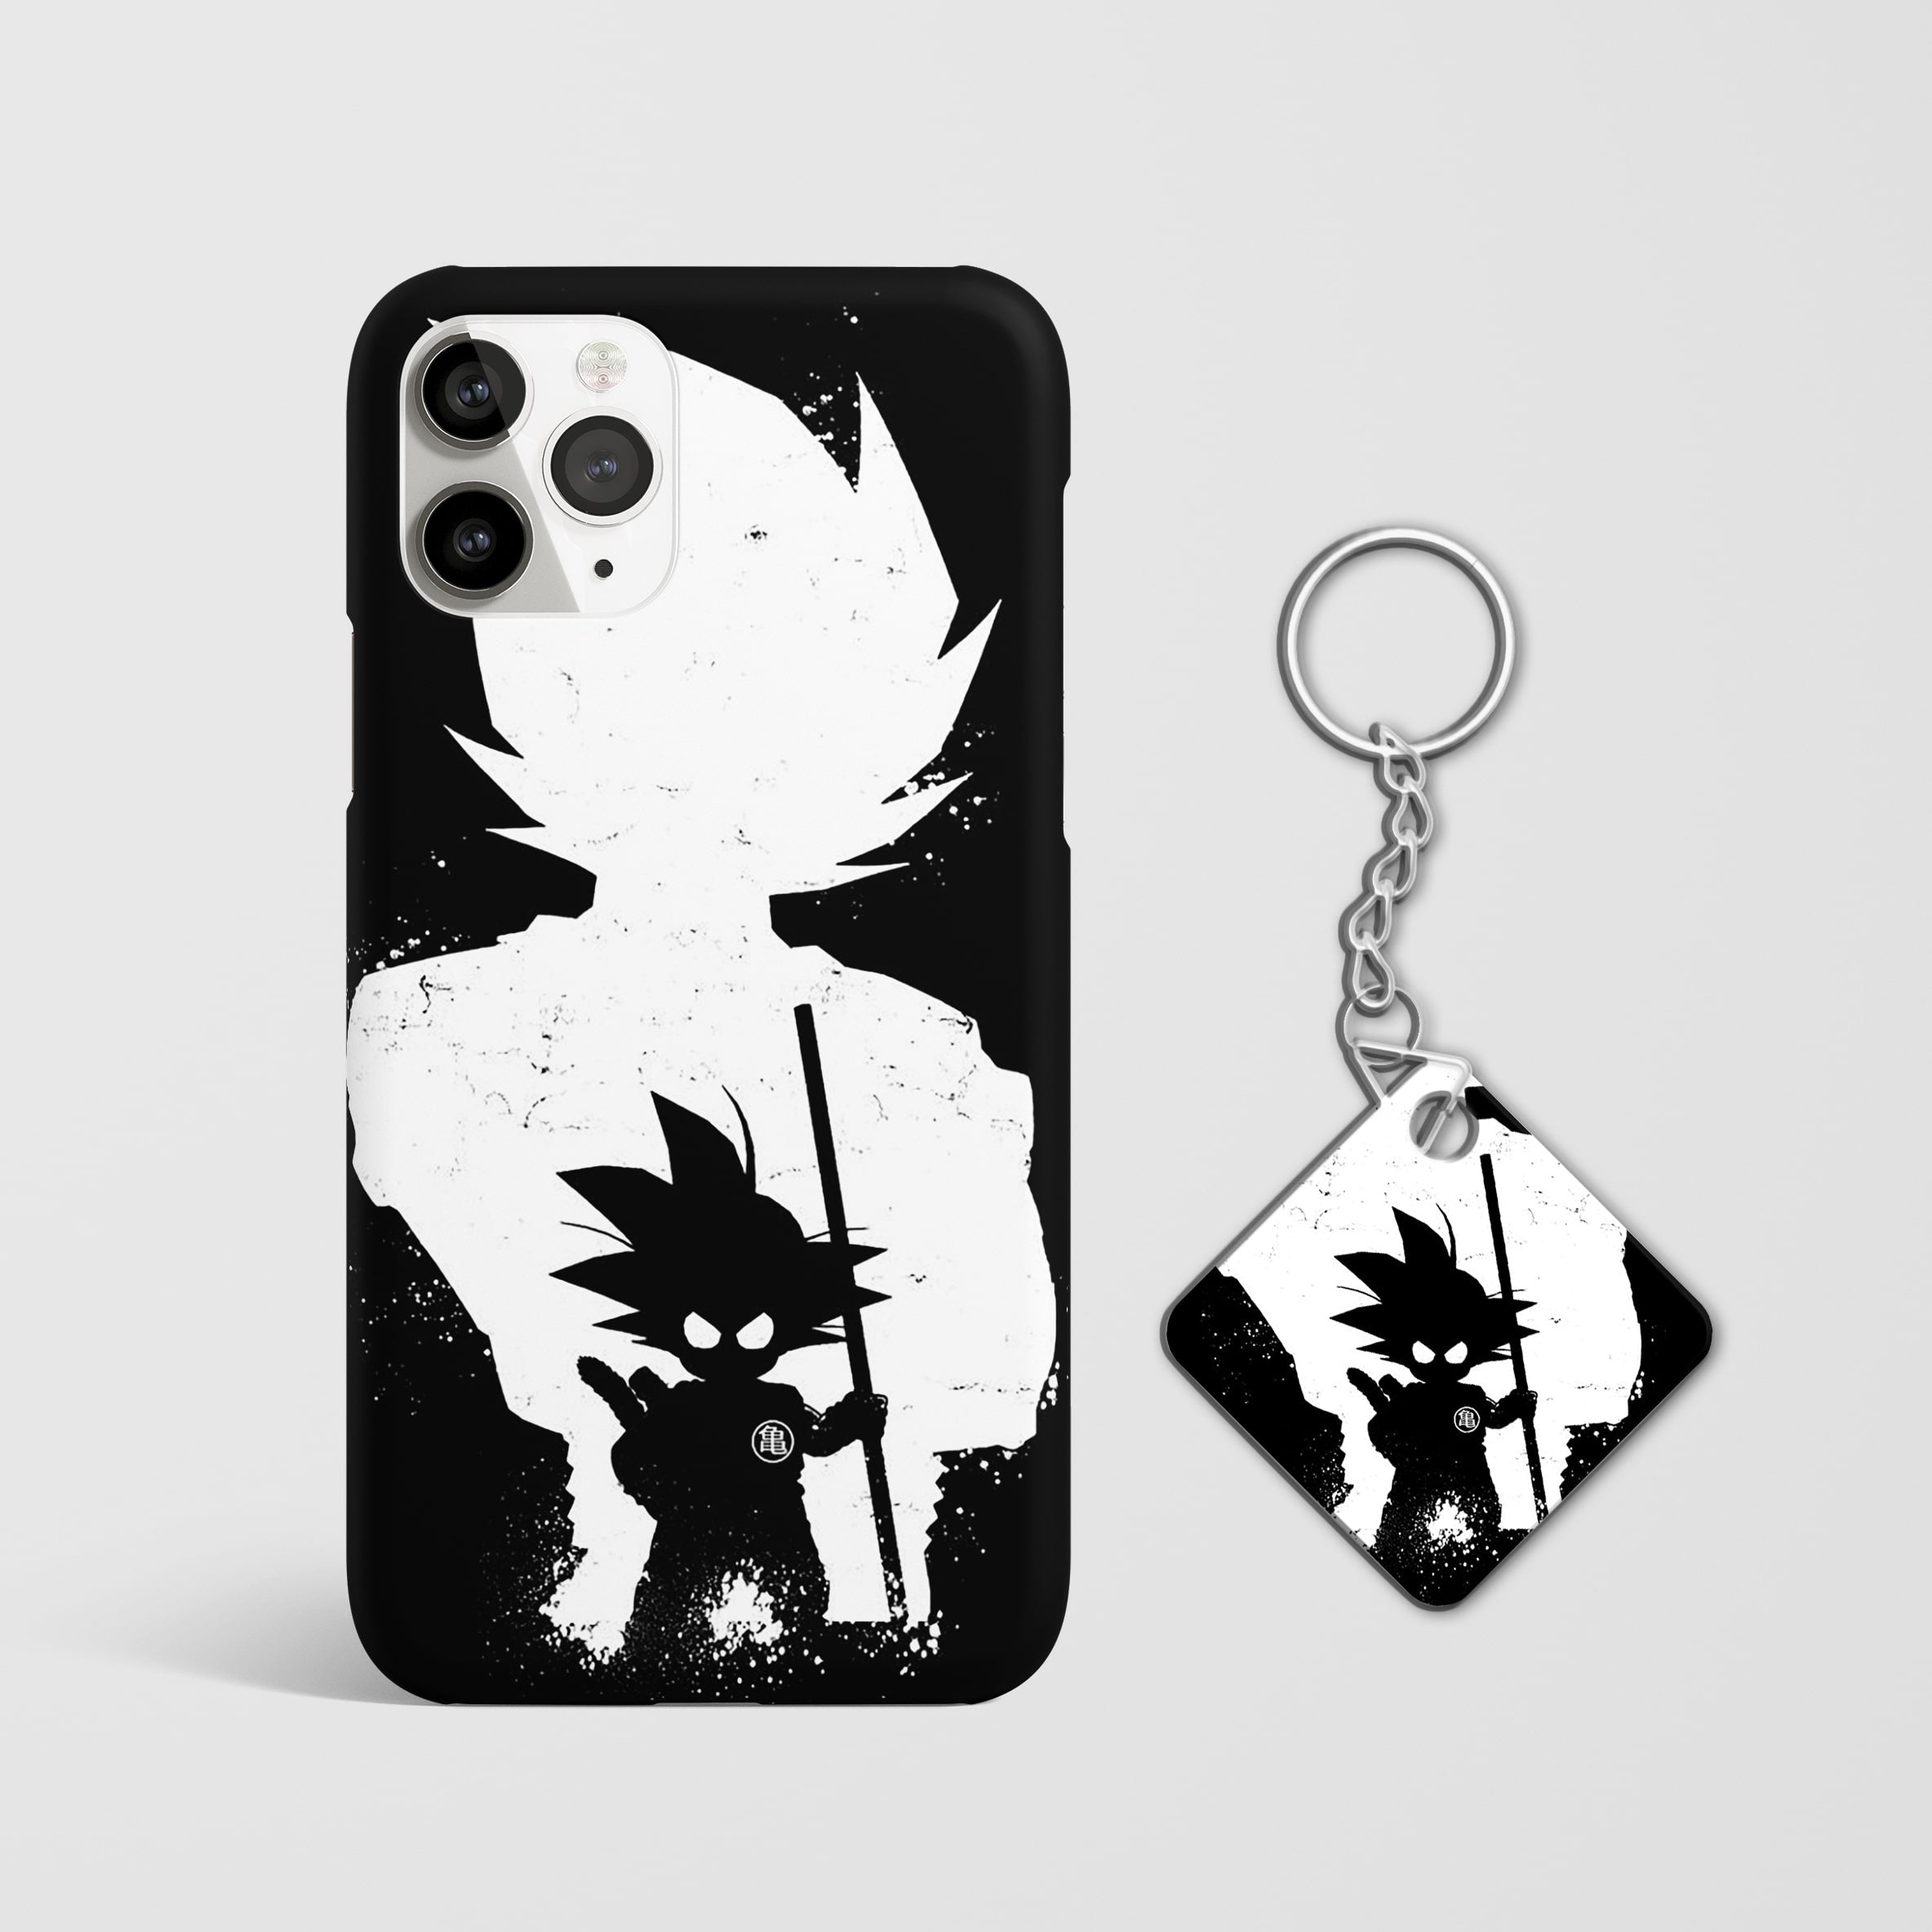 Gohan Black and White Phone Cover with Keychain